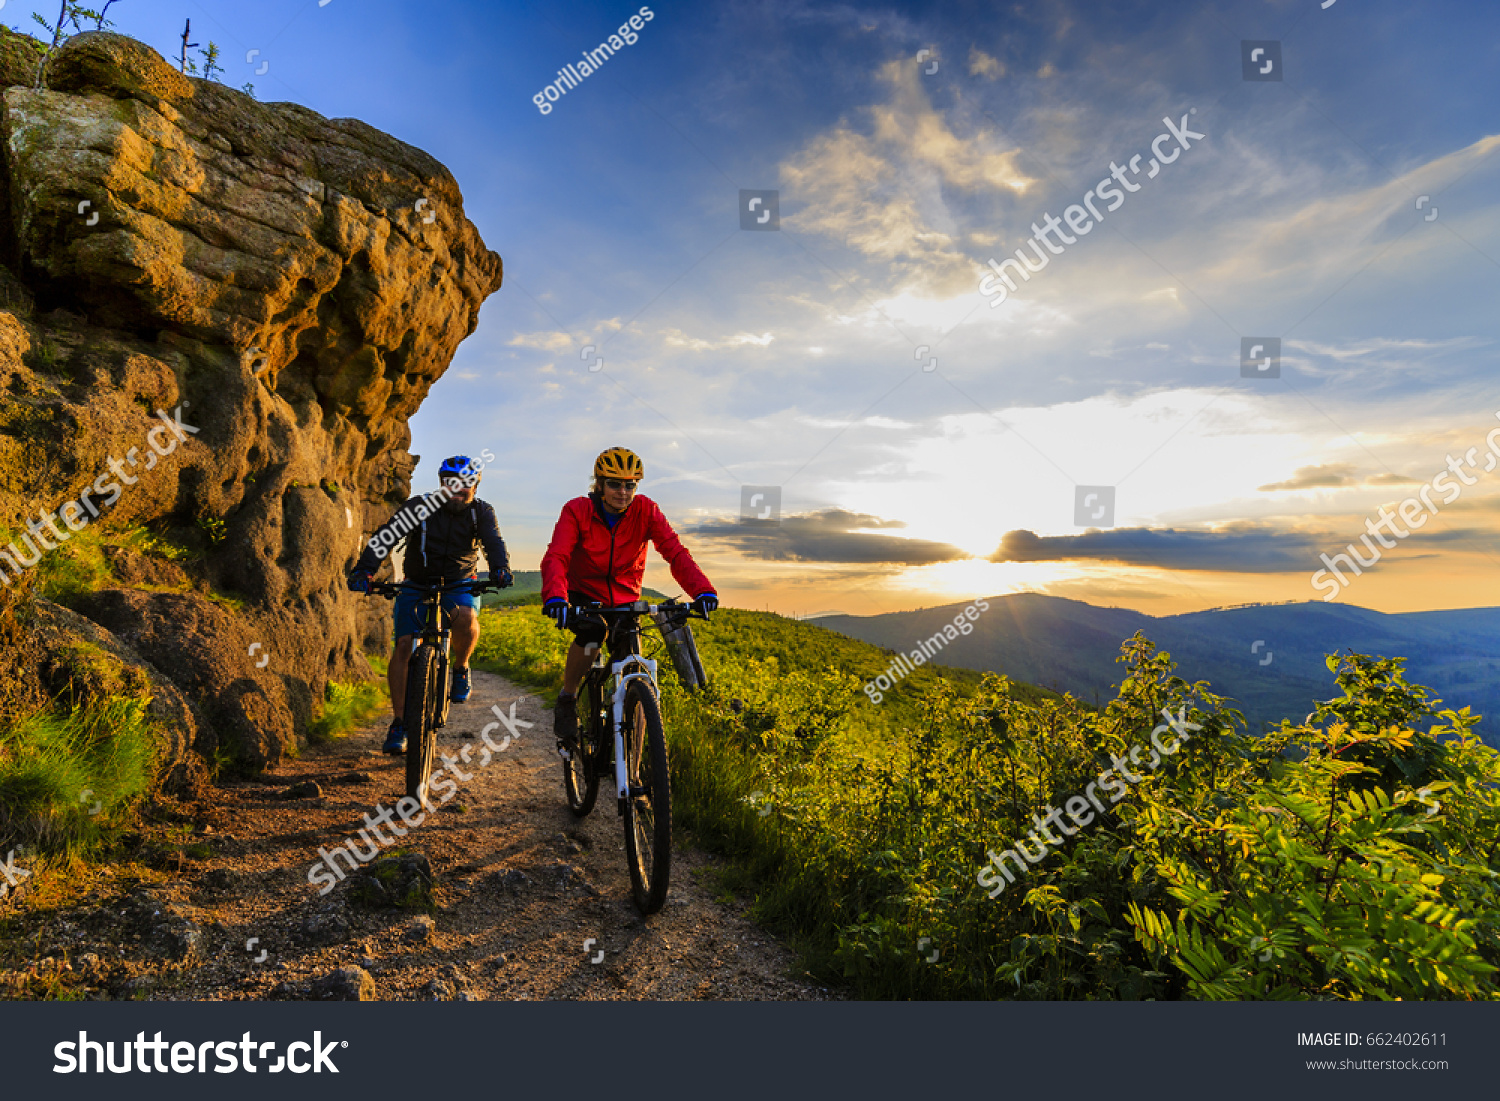 Mountain biking women and man riding on bikes at sunset mountains forest landscape. Couple cycling MTB enduro flow trail track. Outdoor sport activity. #662402611